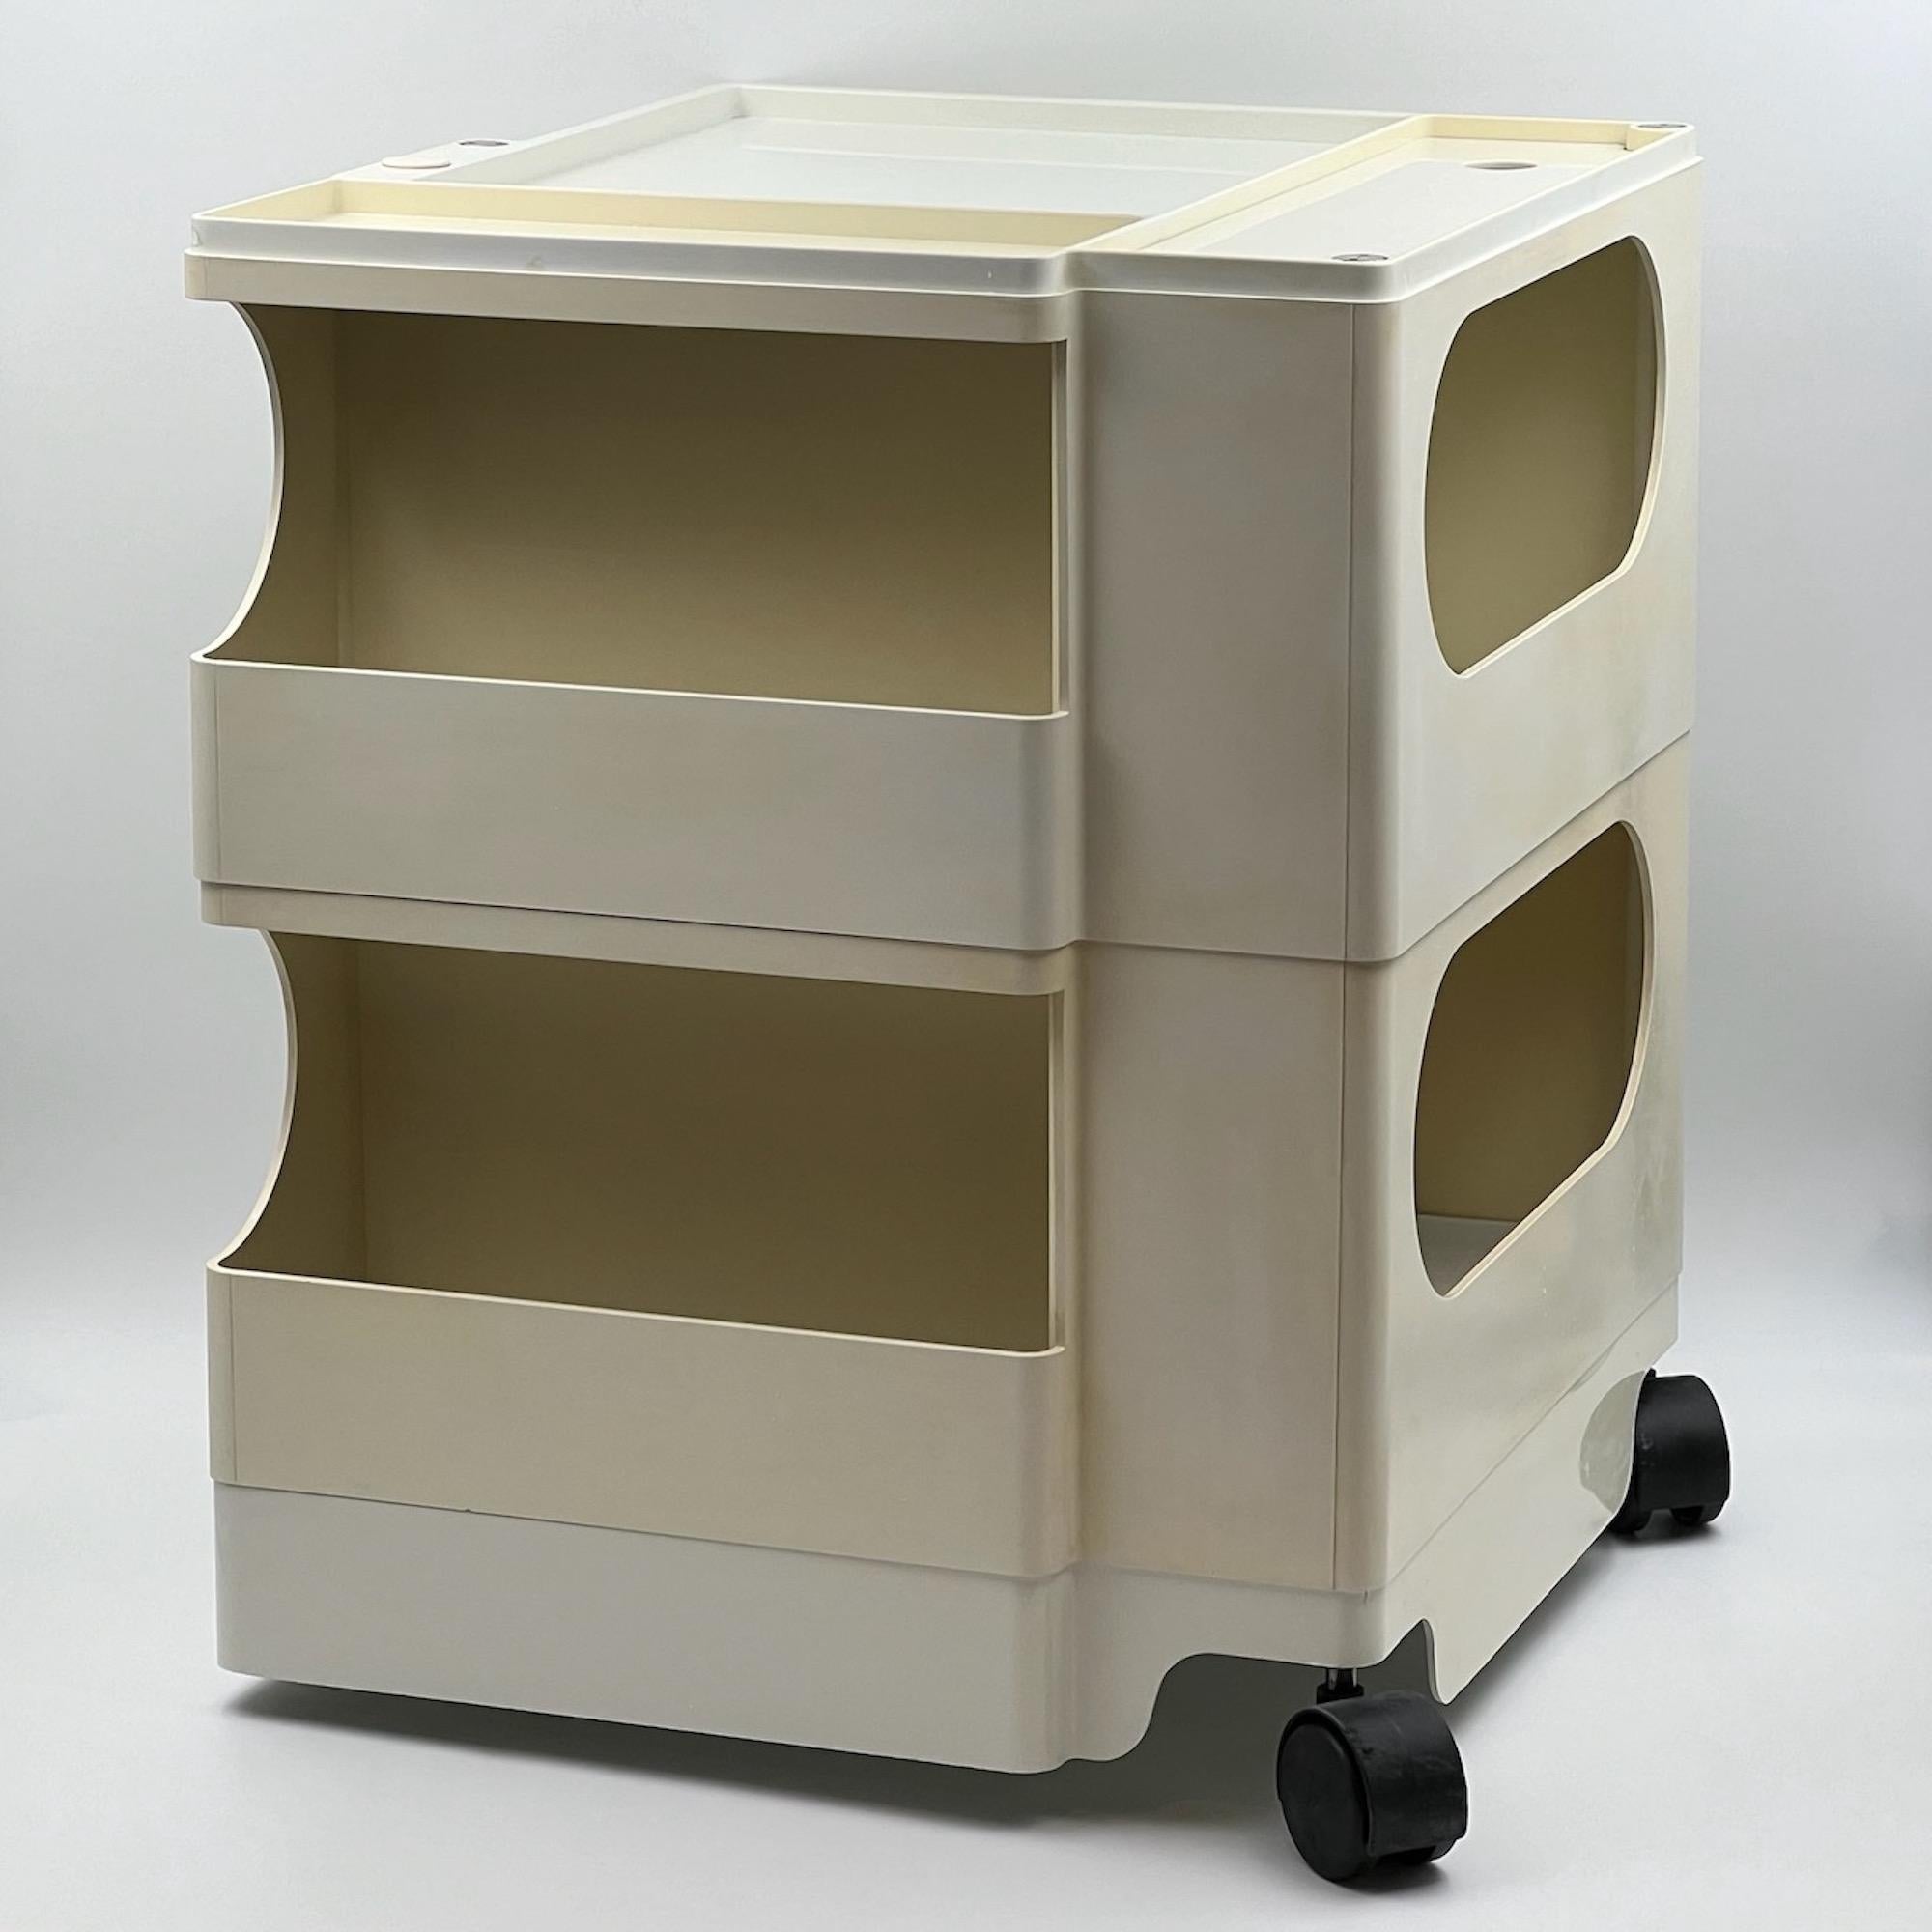 Iconic Boby Trolley by Joe Colombo - Space Age Award Winning Cabinet, 1970s For Sale 1